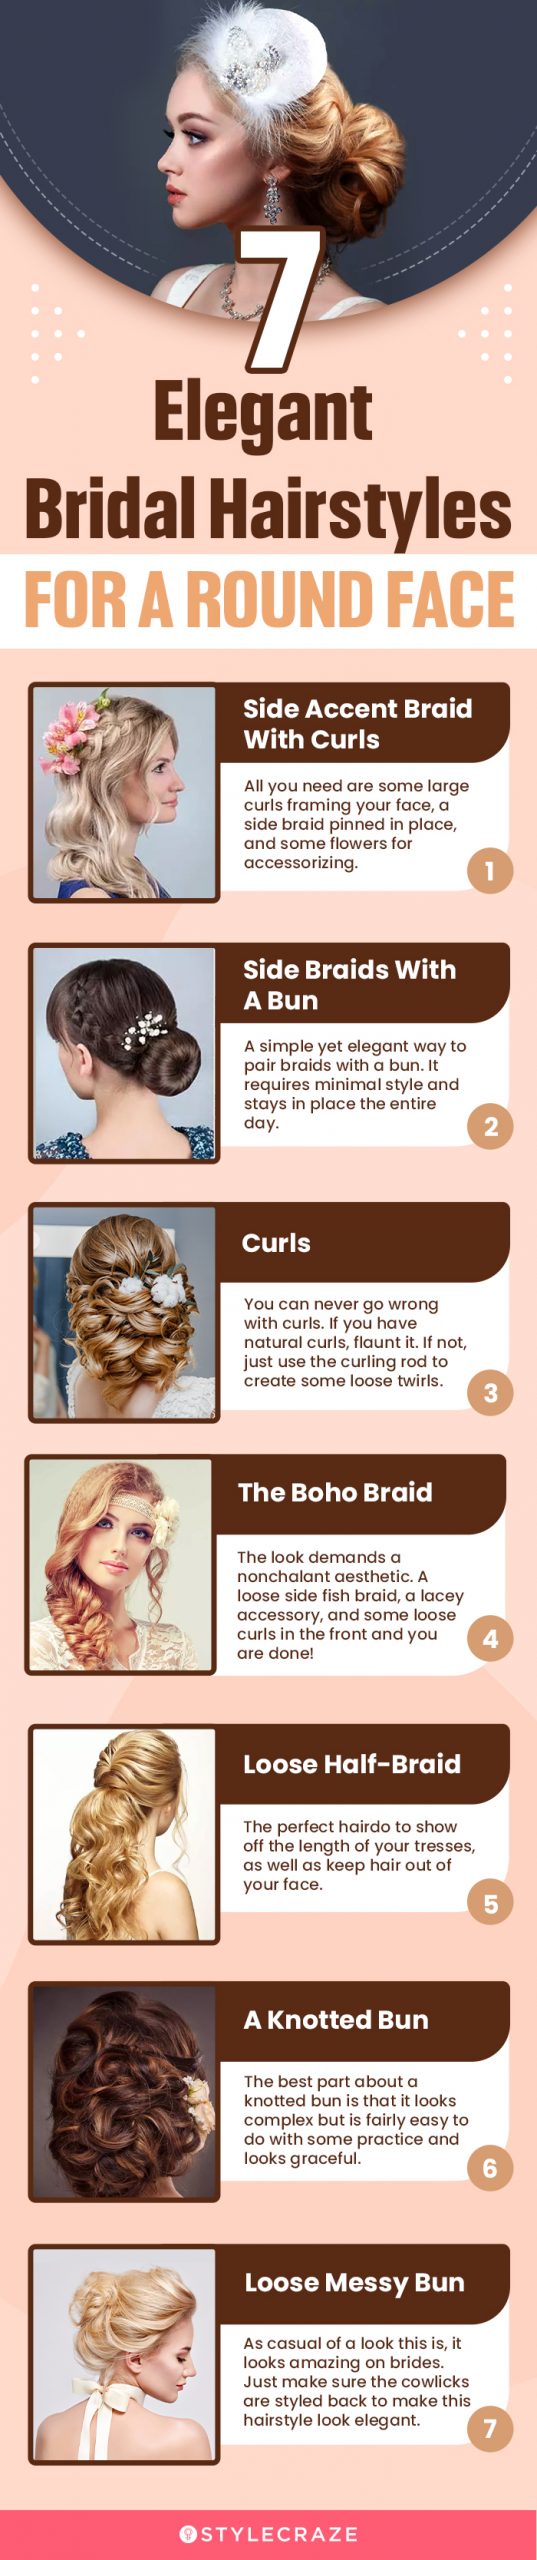 7 elegant hairstyle for round face [infographic]